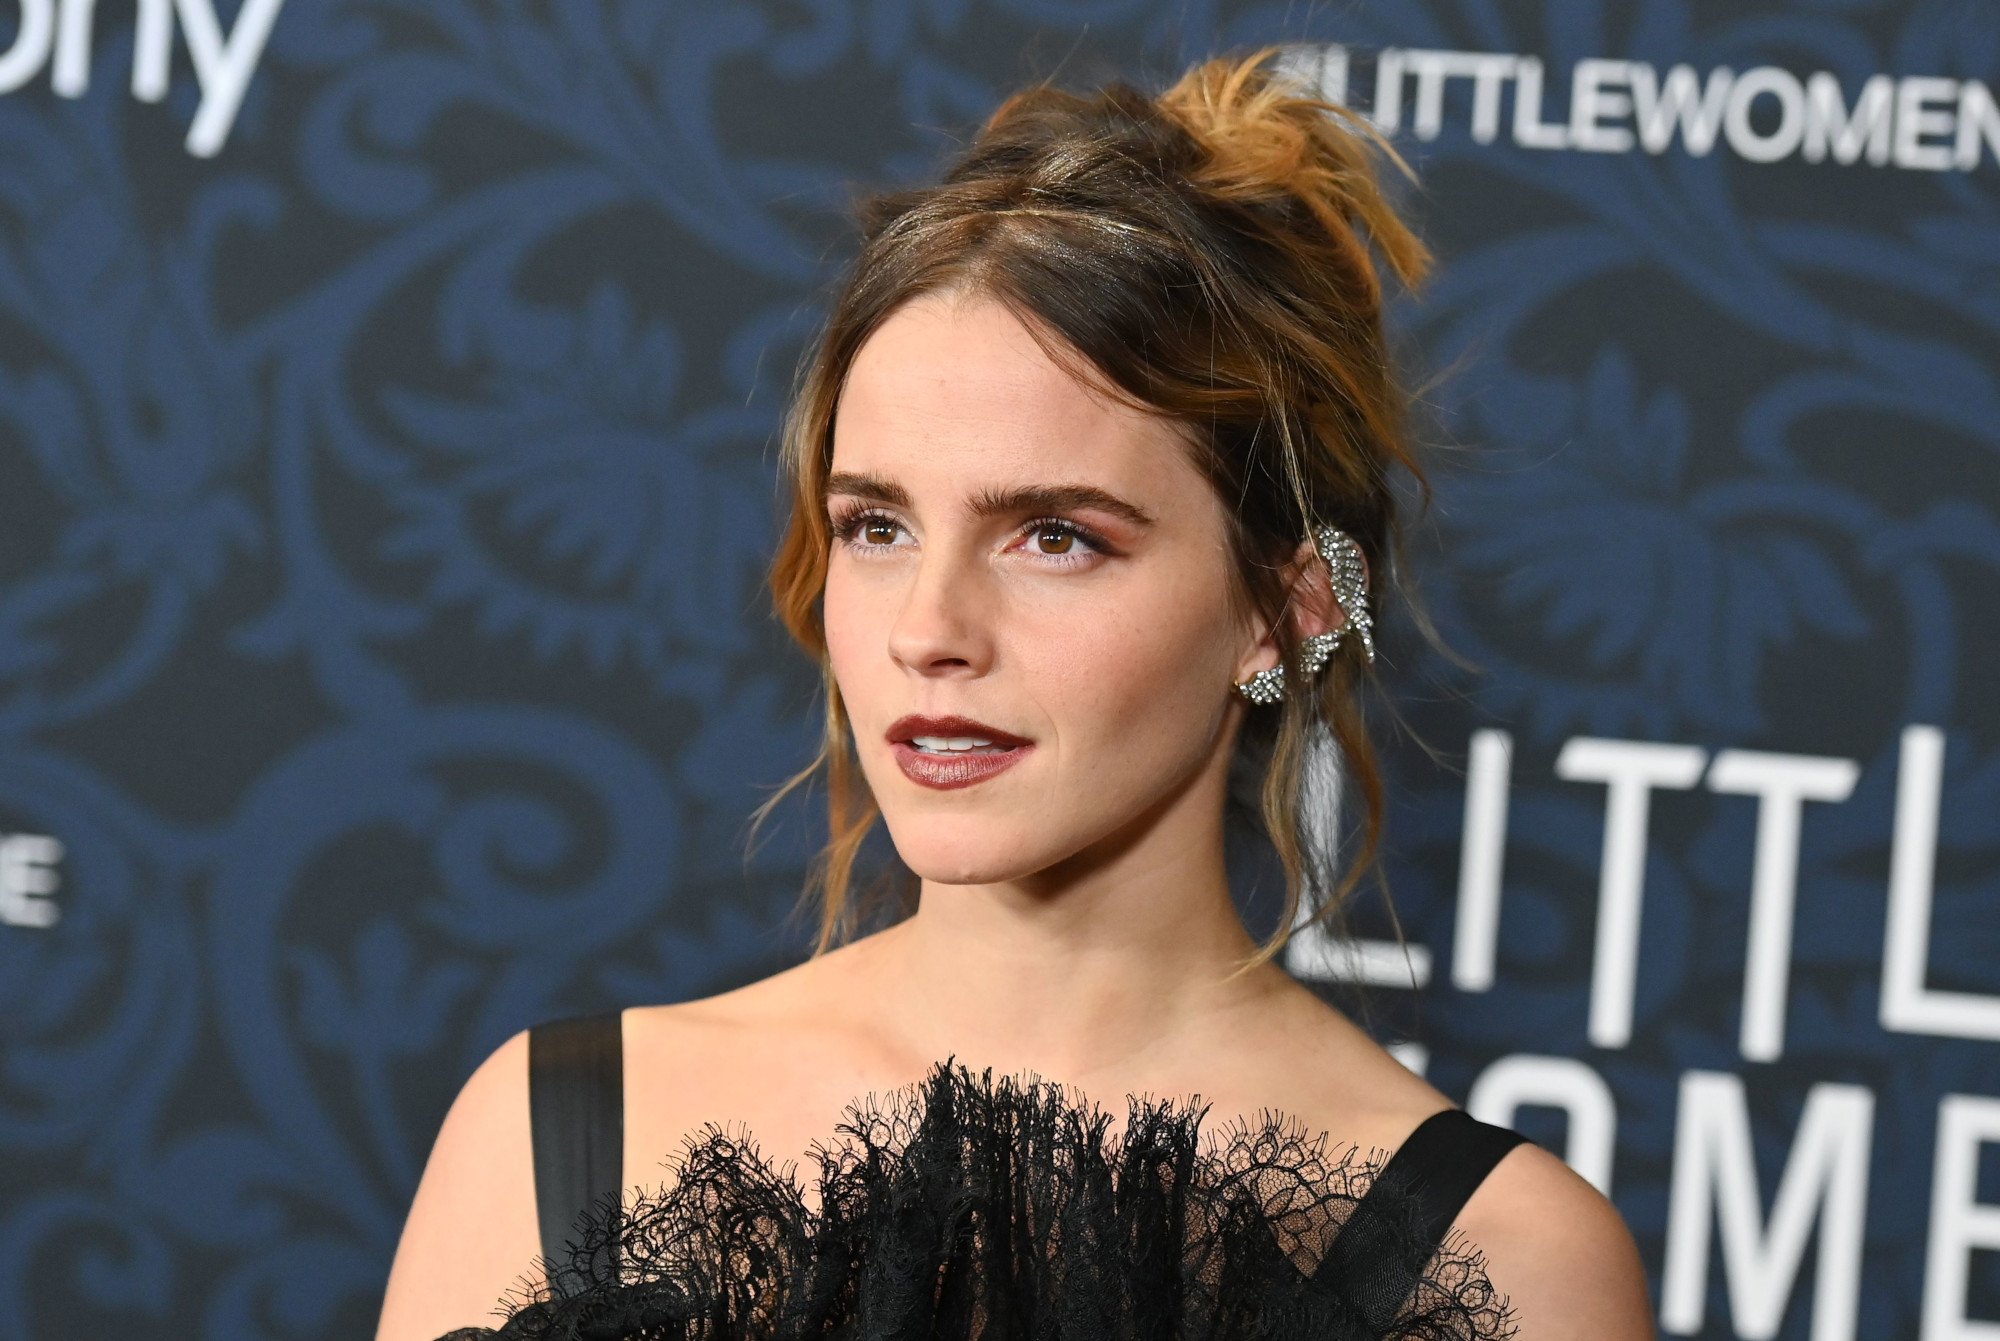 'Harry Potter' star Emma Watson. She's wearing a black dress and her hair is up.